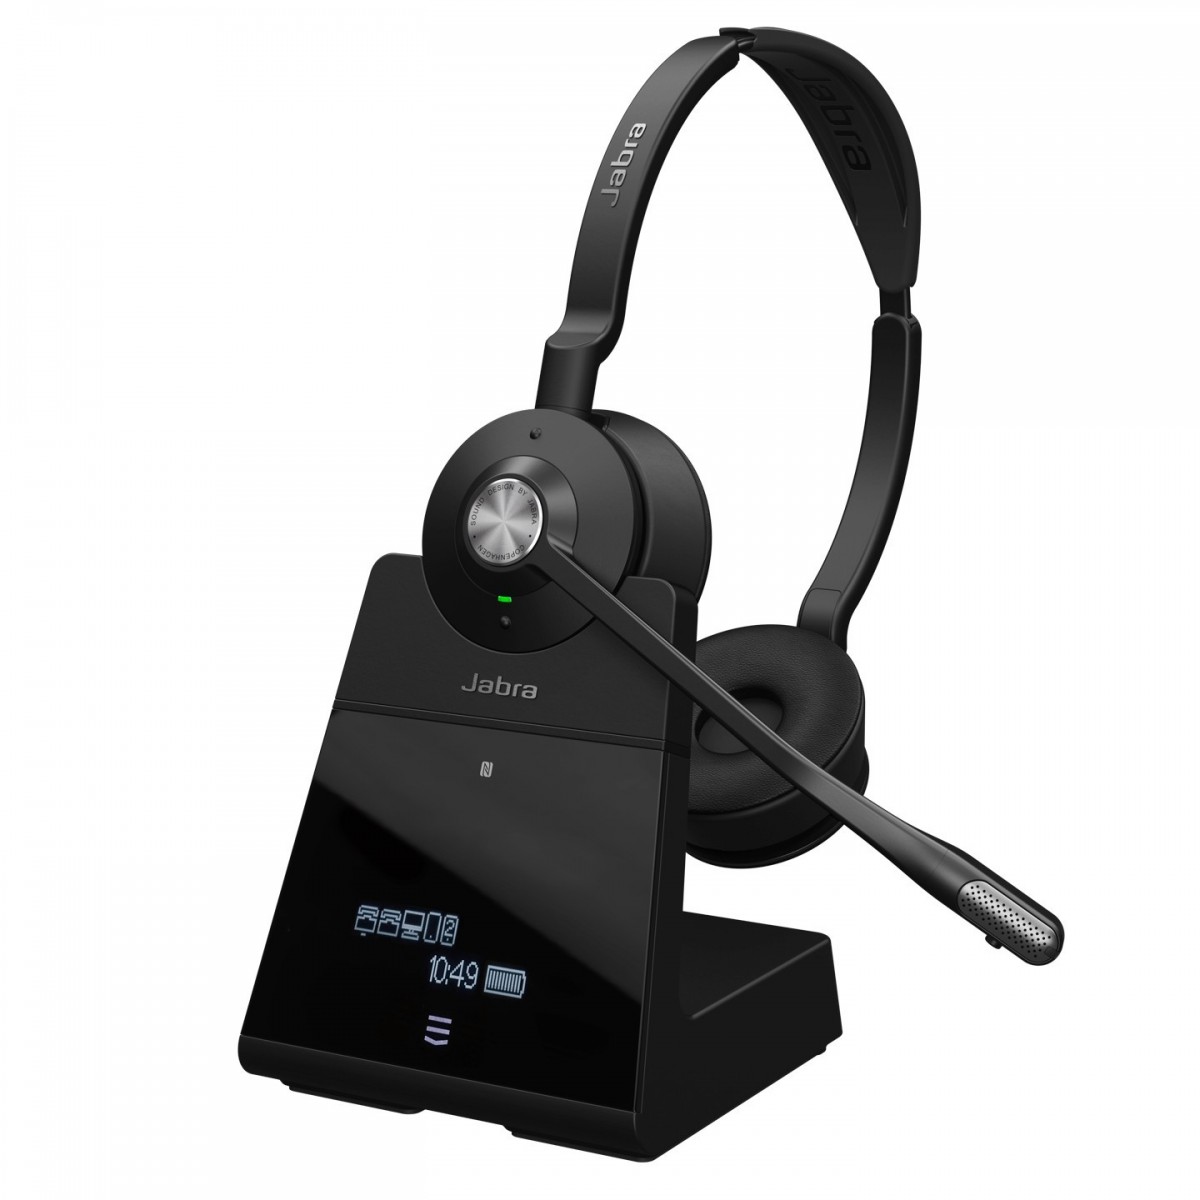 Jabra Engage 75 Stereo - Headset - Head-band - Office/Call center - Black - Binaural - CE - CB - FCC - IC - NOM - NTC - EAC - PS